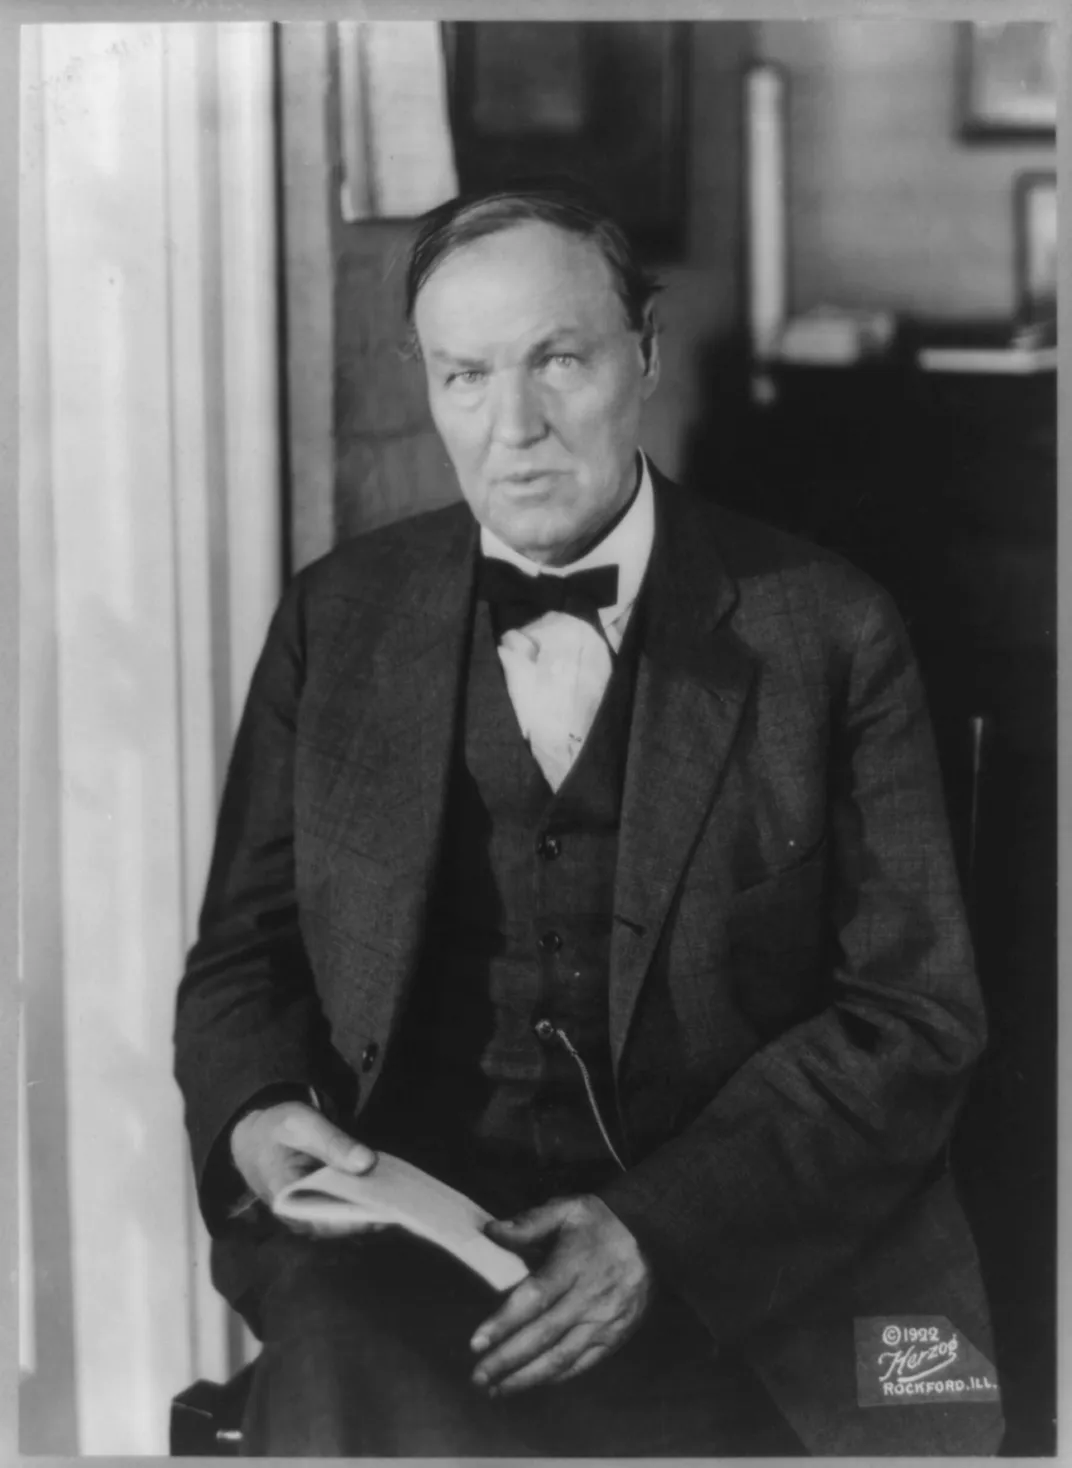 Clarence Darrow, defense attorney for Leopold and Loeb